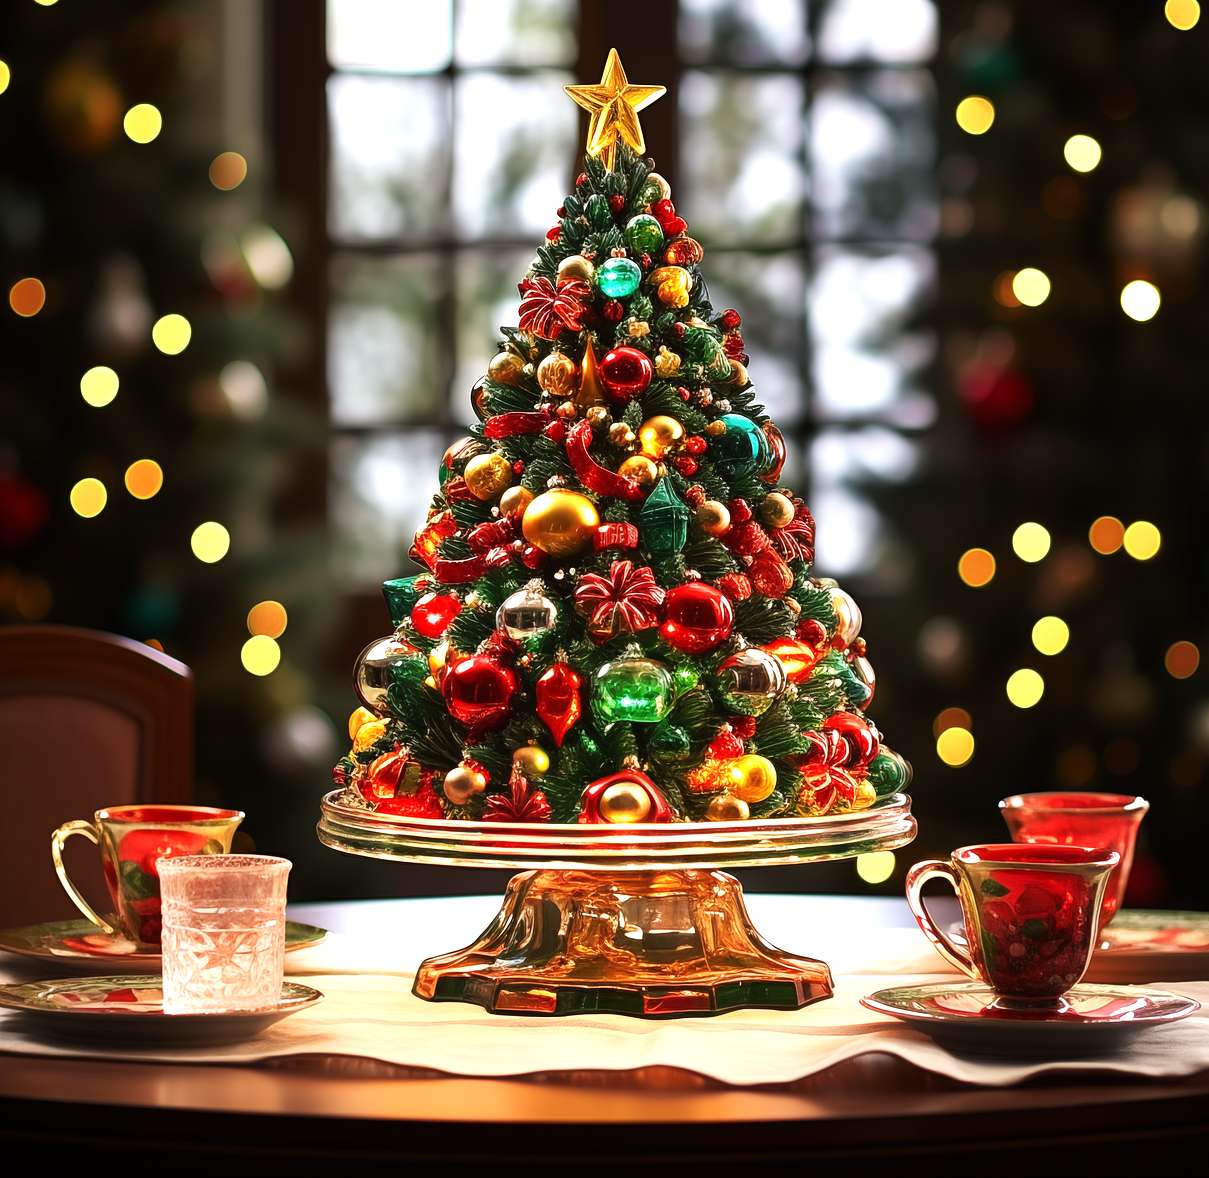 Decorative Christmas tree on the table online puzzle